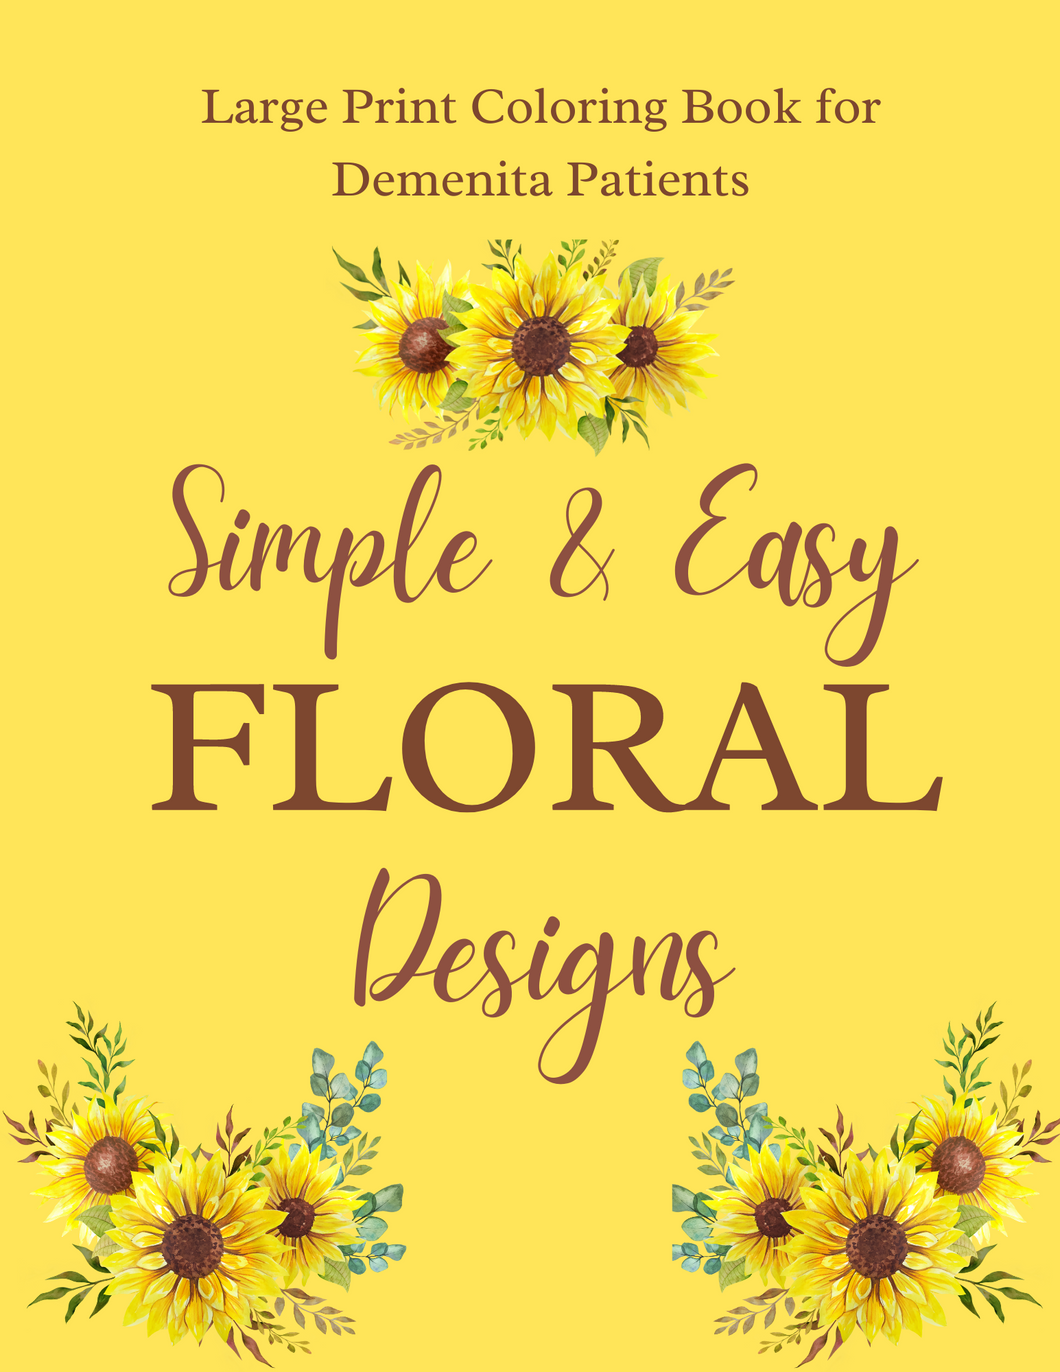 Simple & Easy Floral Designs Large Print Coloring Book for Dementia Patients